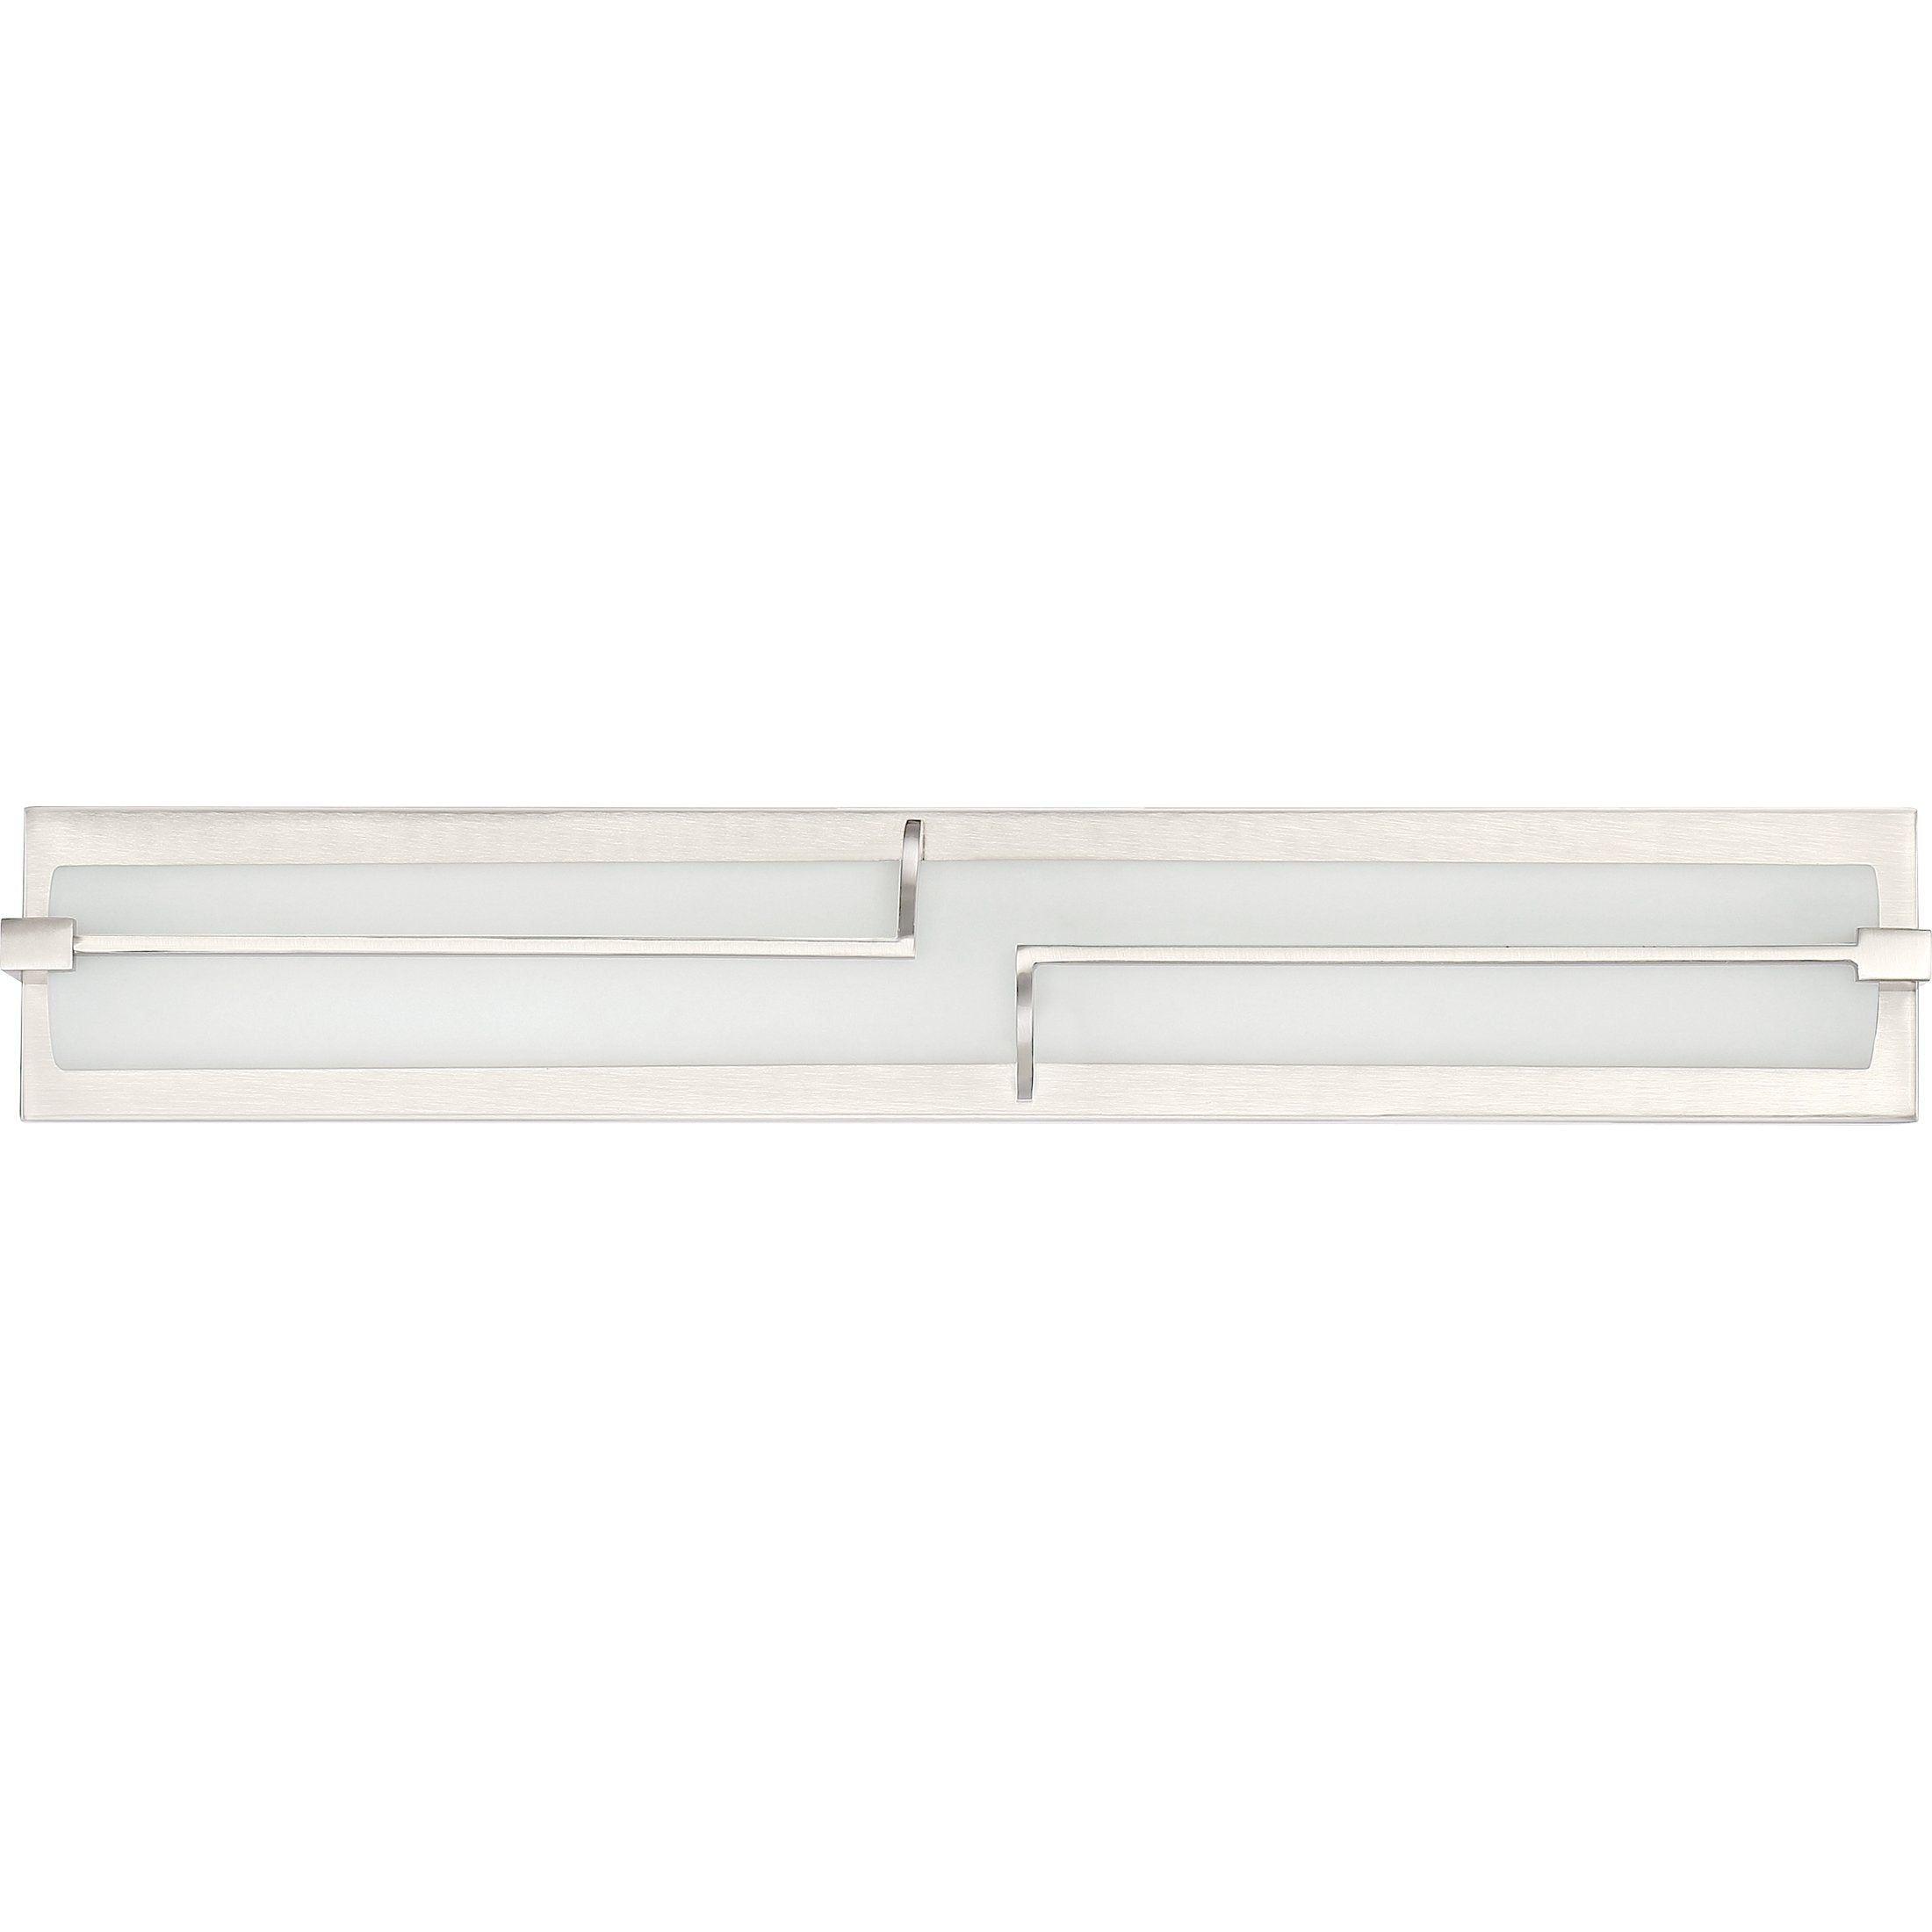 Quoizel - Lateral Vanity Light - Lights Canada